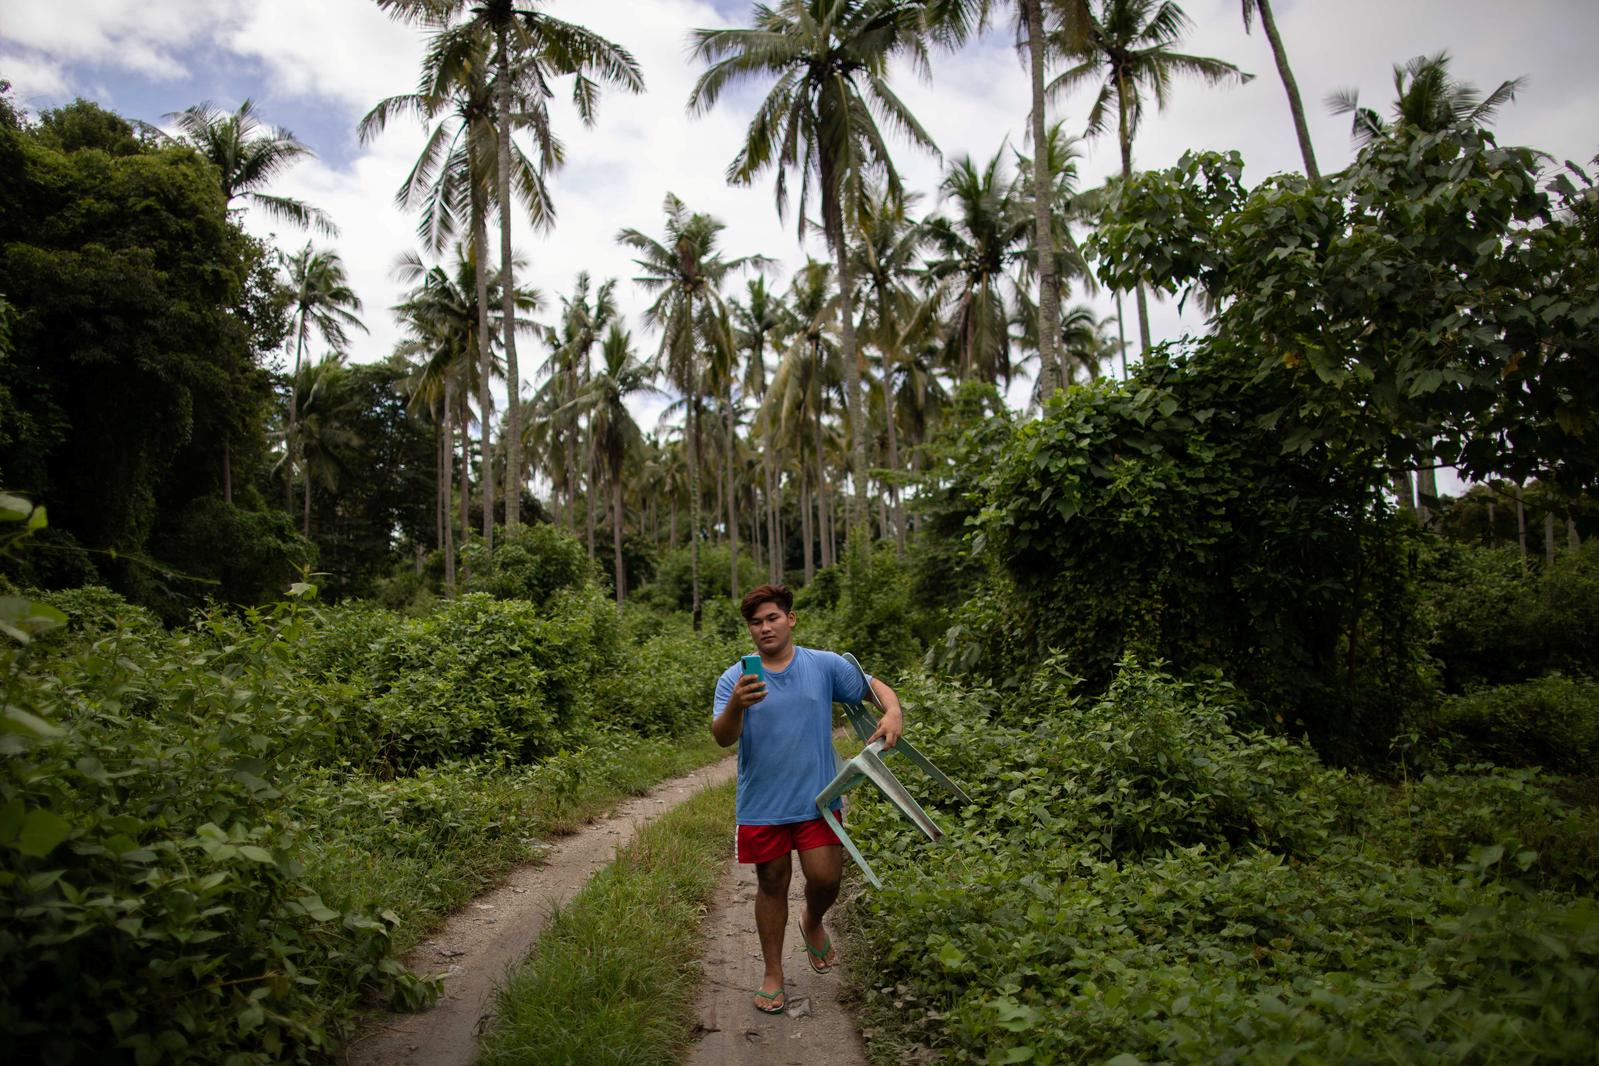 Mark Joseph Andal, 18, a college student, tries to find a spot in the forrest where there is an internet connection, in order to take part in an online class using his smartphone following the suspension of physical classes during the coronavirus disease (COVID-19) outbreak, in Mabalanoy, San Juan, Batangas, Philippines October 15, 2020. Andal has taken a part-time job in construction to purchase a smartphone for virtual classes and has also built a forest shelter to capture an internet signal. When the signal fades, Andal picks up his plastic chair to move to another spot, and if it rains, he holds the phone in one hand and an umbrella in the other. 'We're not rich, and finishing school is my only way to repay my parents for raising me.' Photo: Reuters